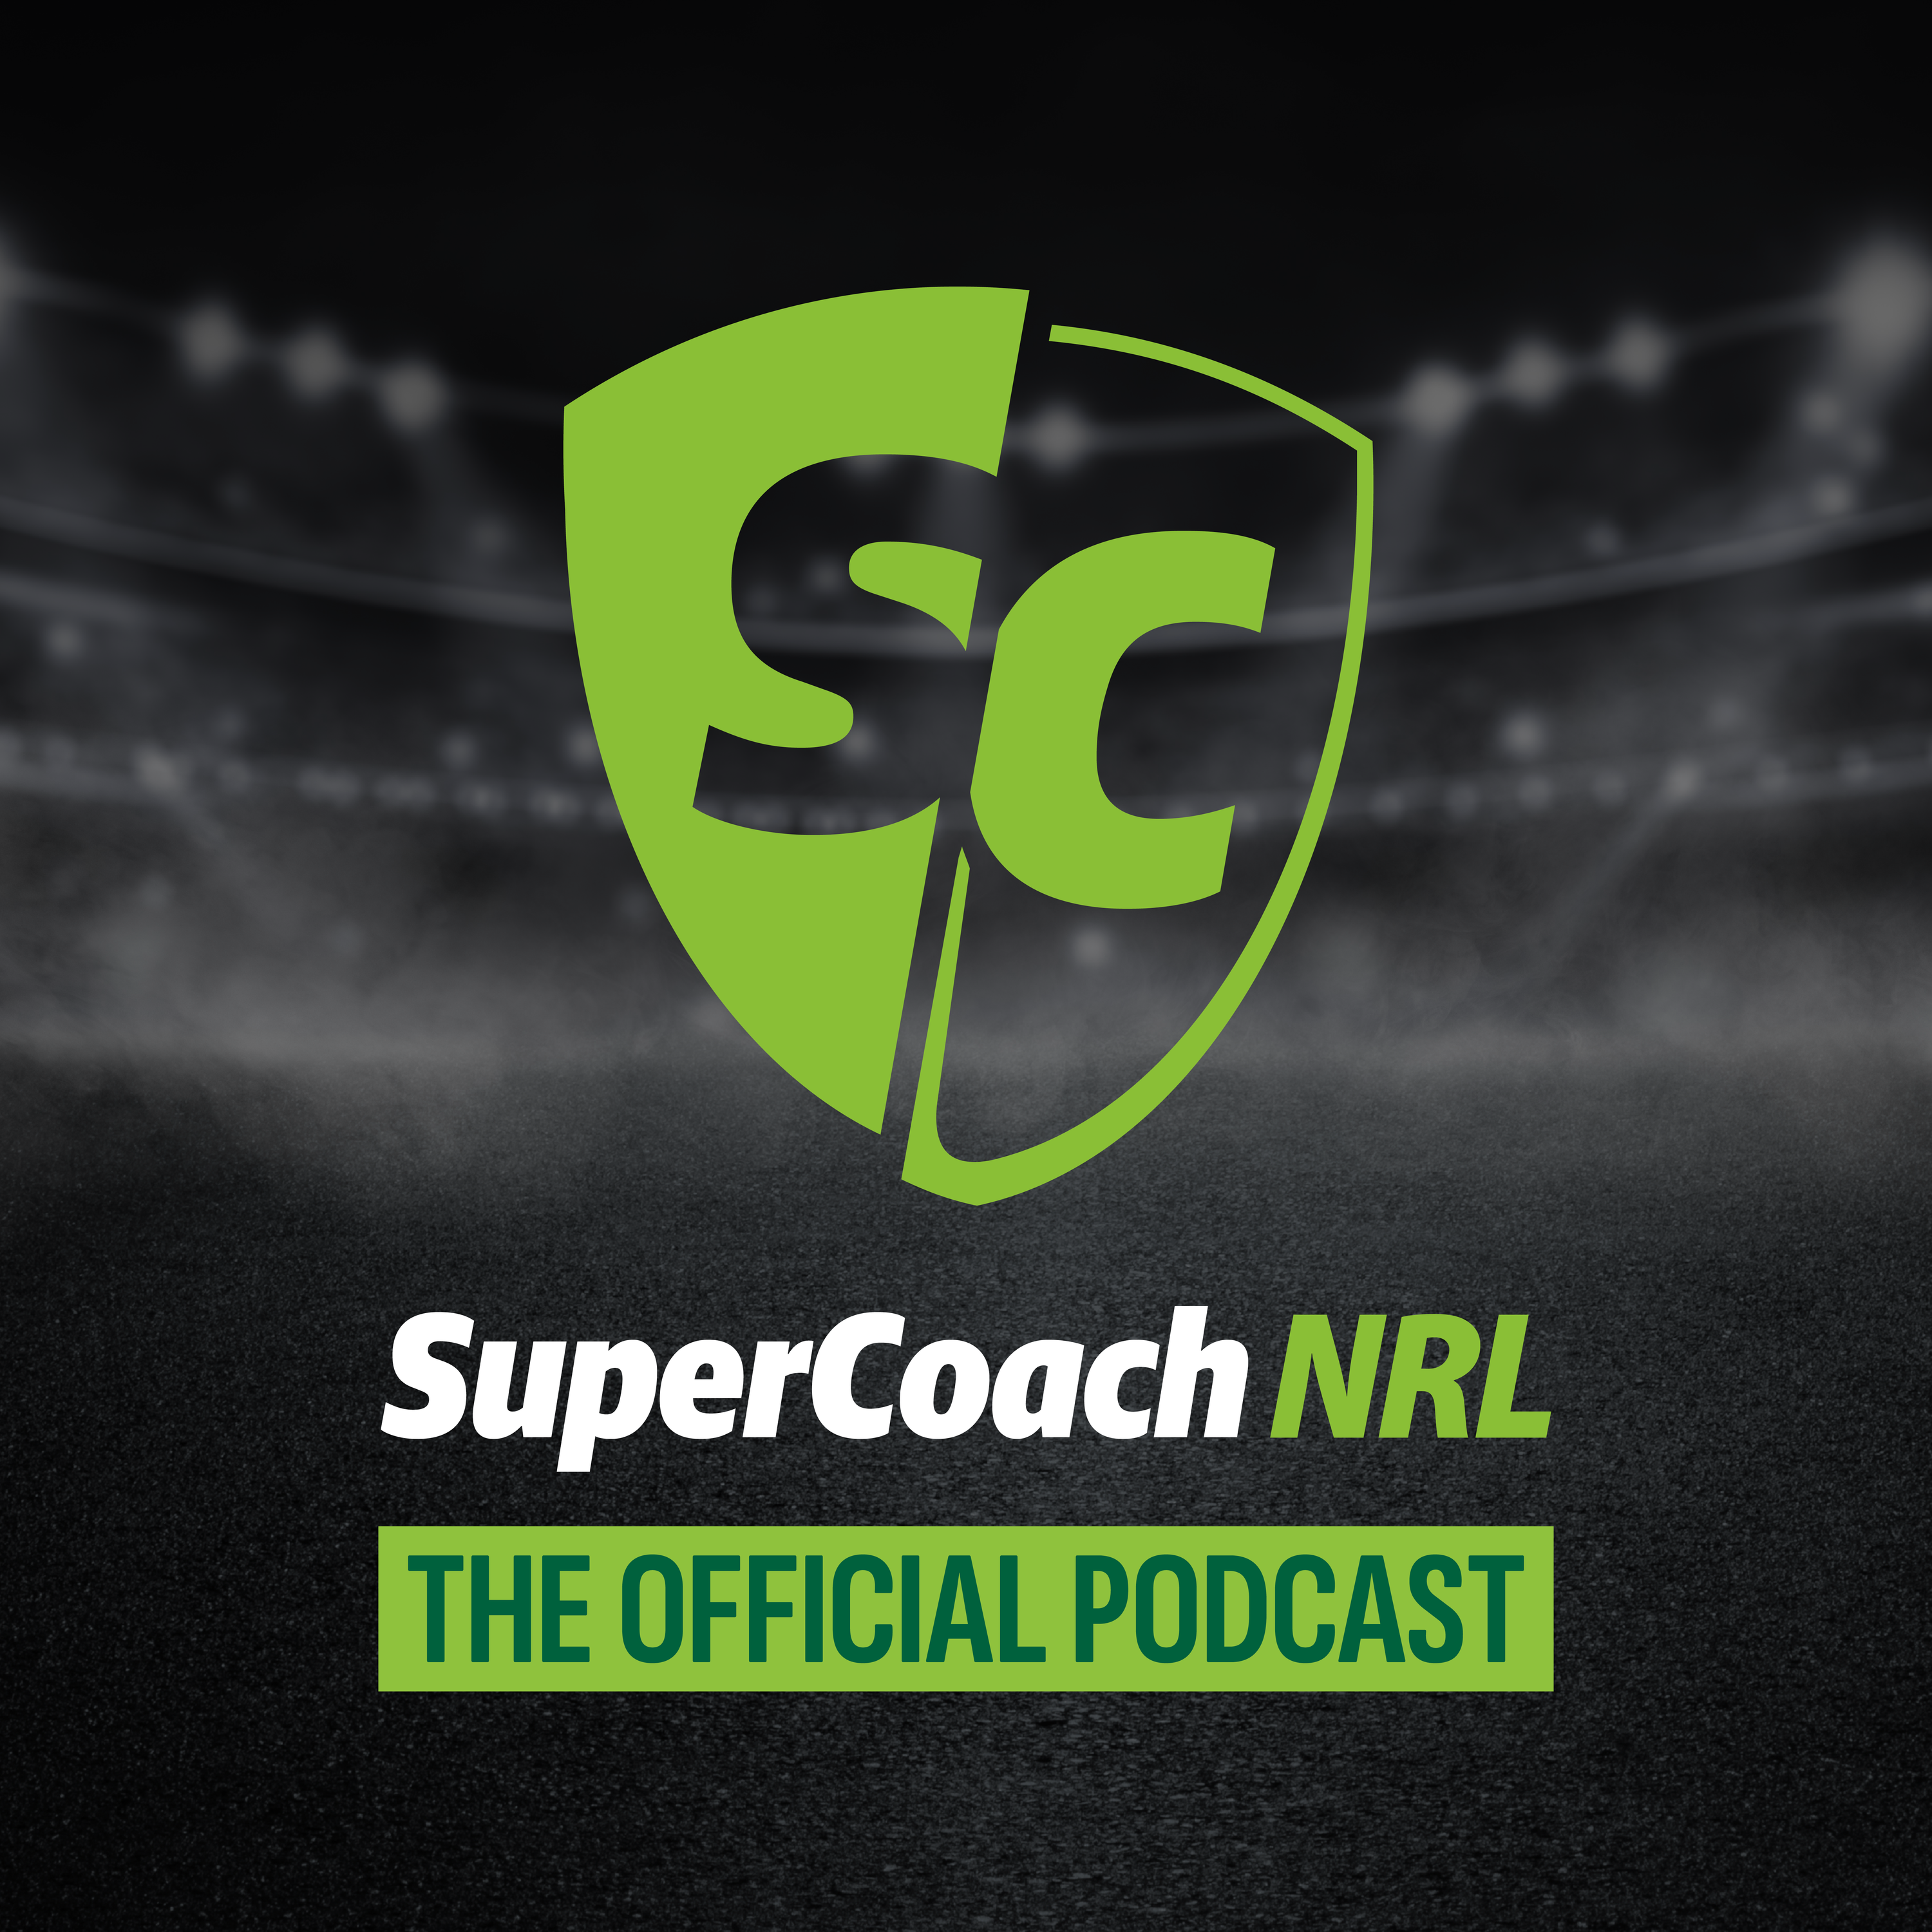 NRL SuperCoach podcast: Round 7 preview